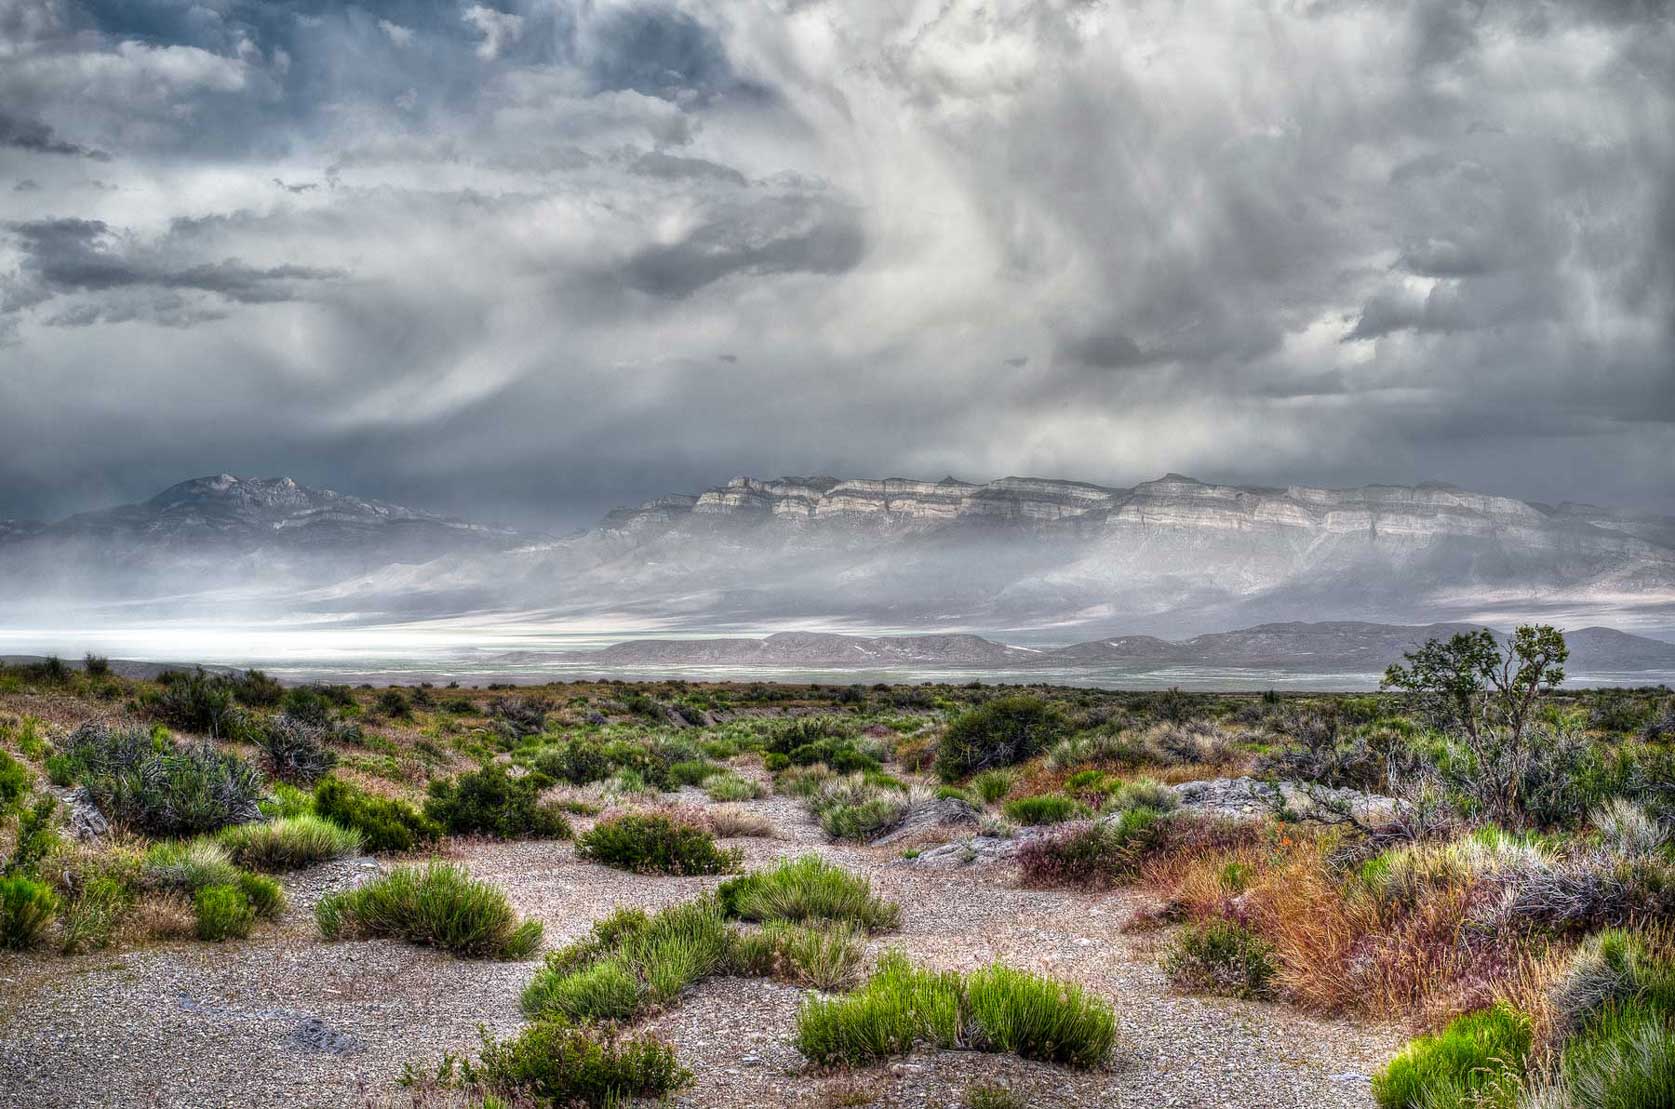 Spring Storm in the Great Basin